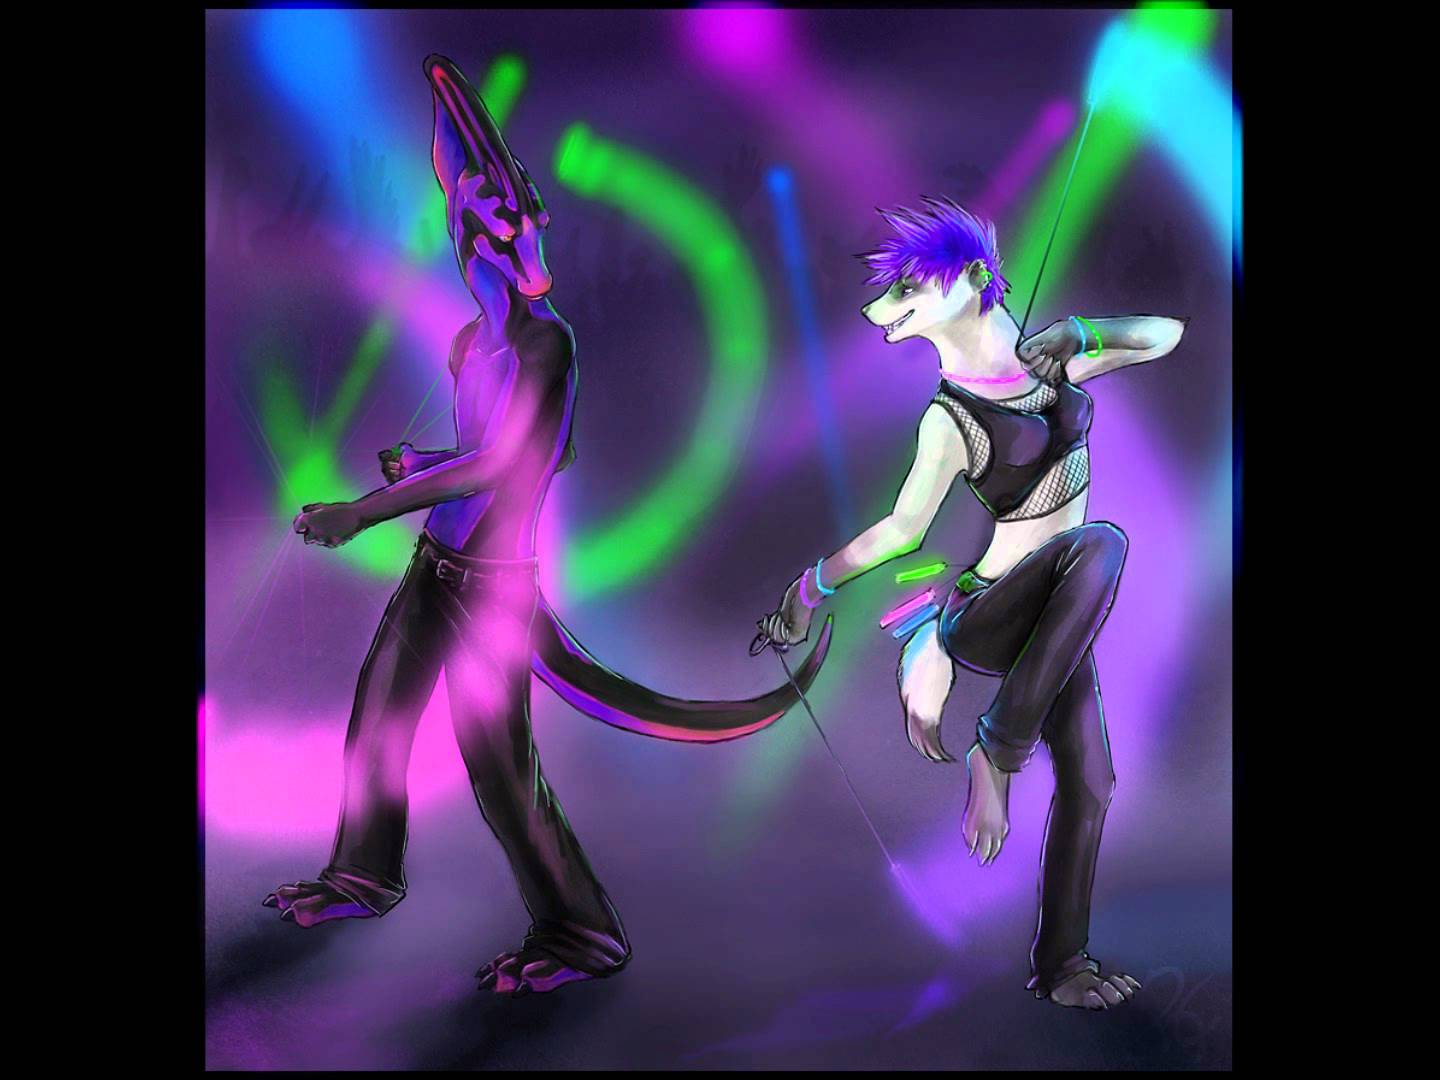 Gay Furry Porn Wallpaper - Free download Gay Furry Porn Media Gay Art Furry Original Search Hairy Rave  [1440x1080] for your Desktop, Mobile & Tablet | Explore 49+ Furry Rave  Wallpaper | Furry Backgrounds, Furry Wallpapers, Rave Backgrounds